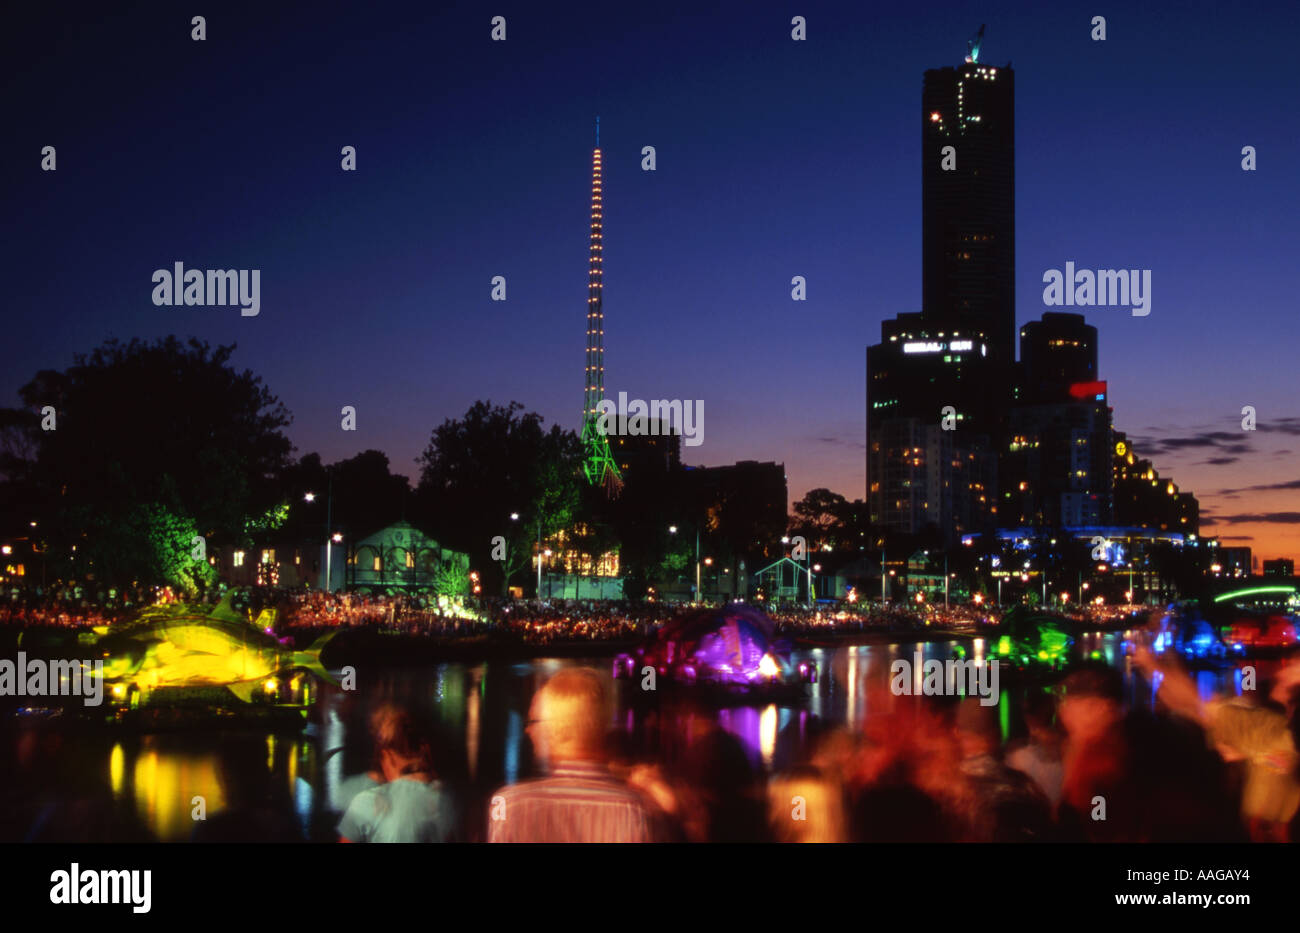 Spectators watching light show on the Yarra River during 2006 Commonwealth Games Melbourne Victoria Australia Stock Photo